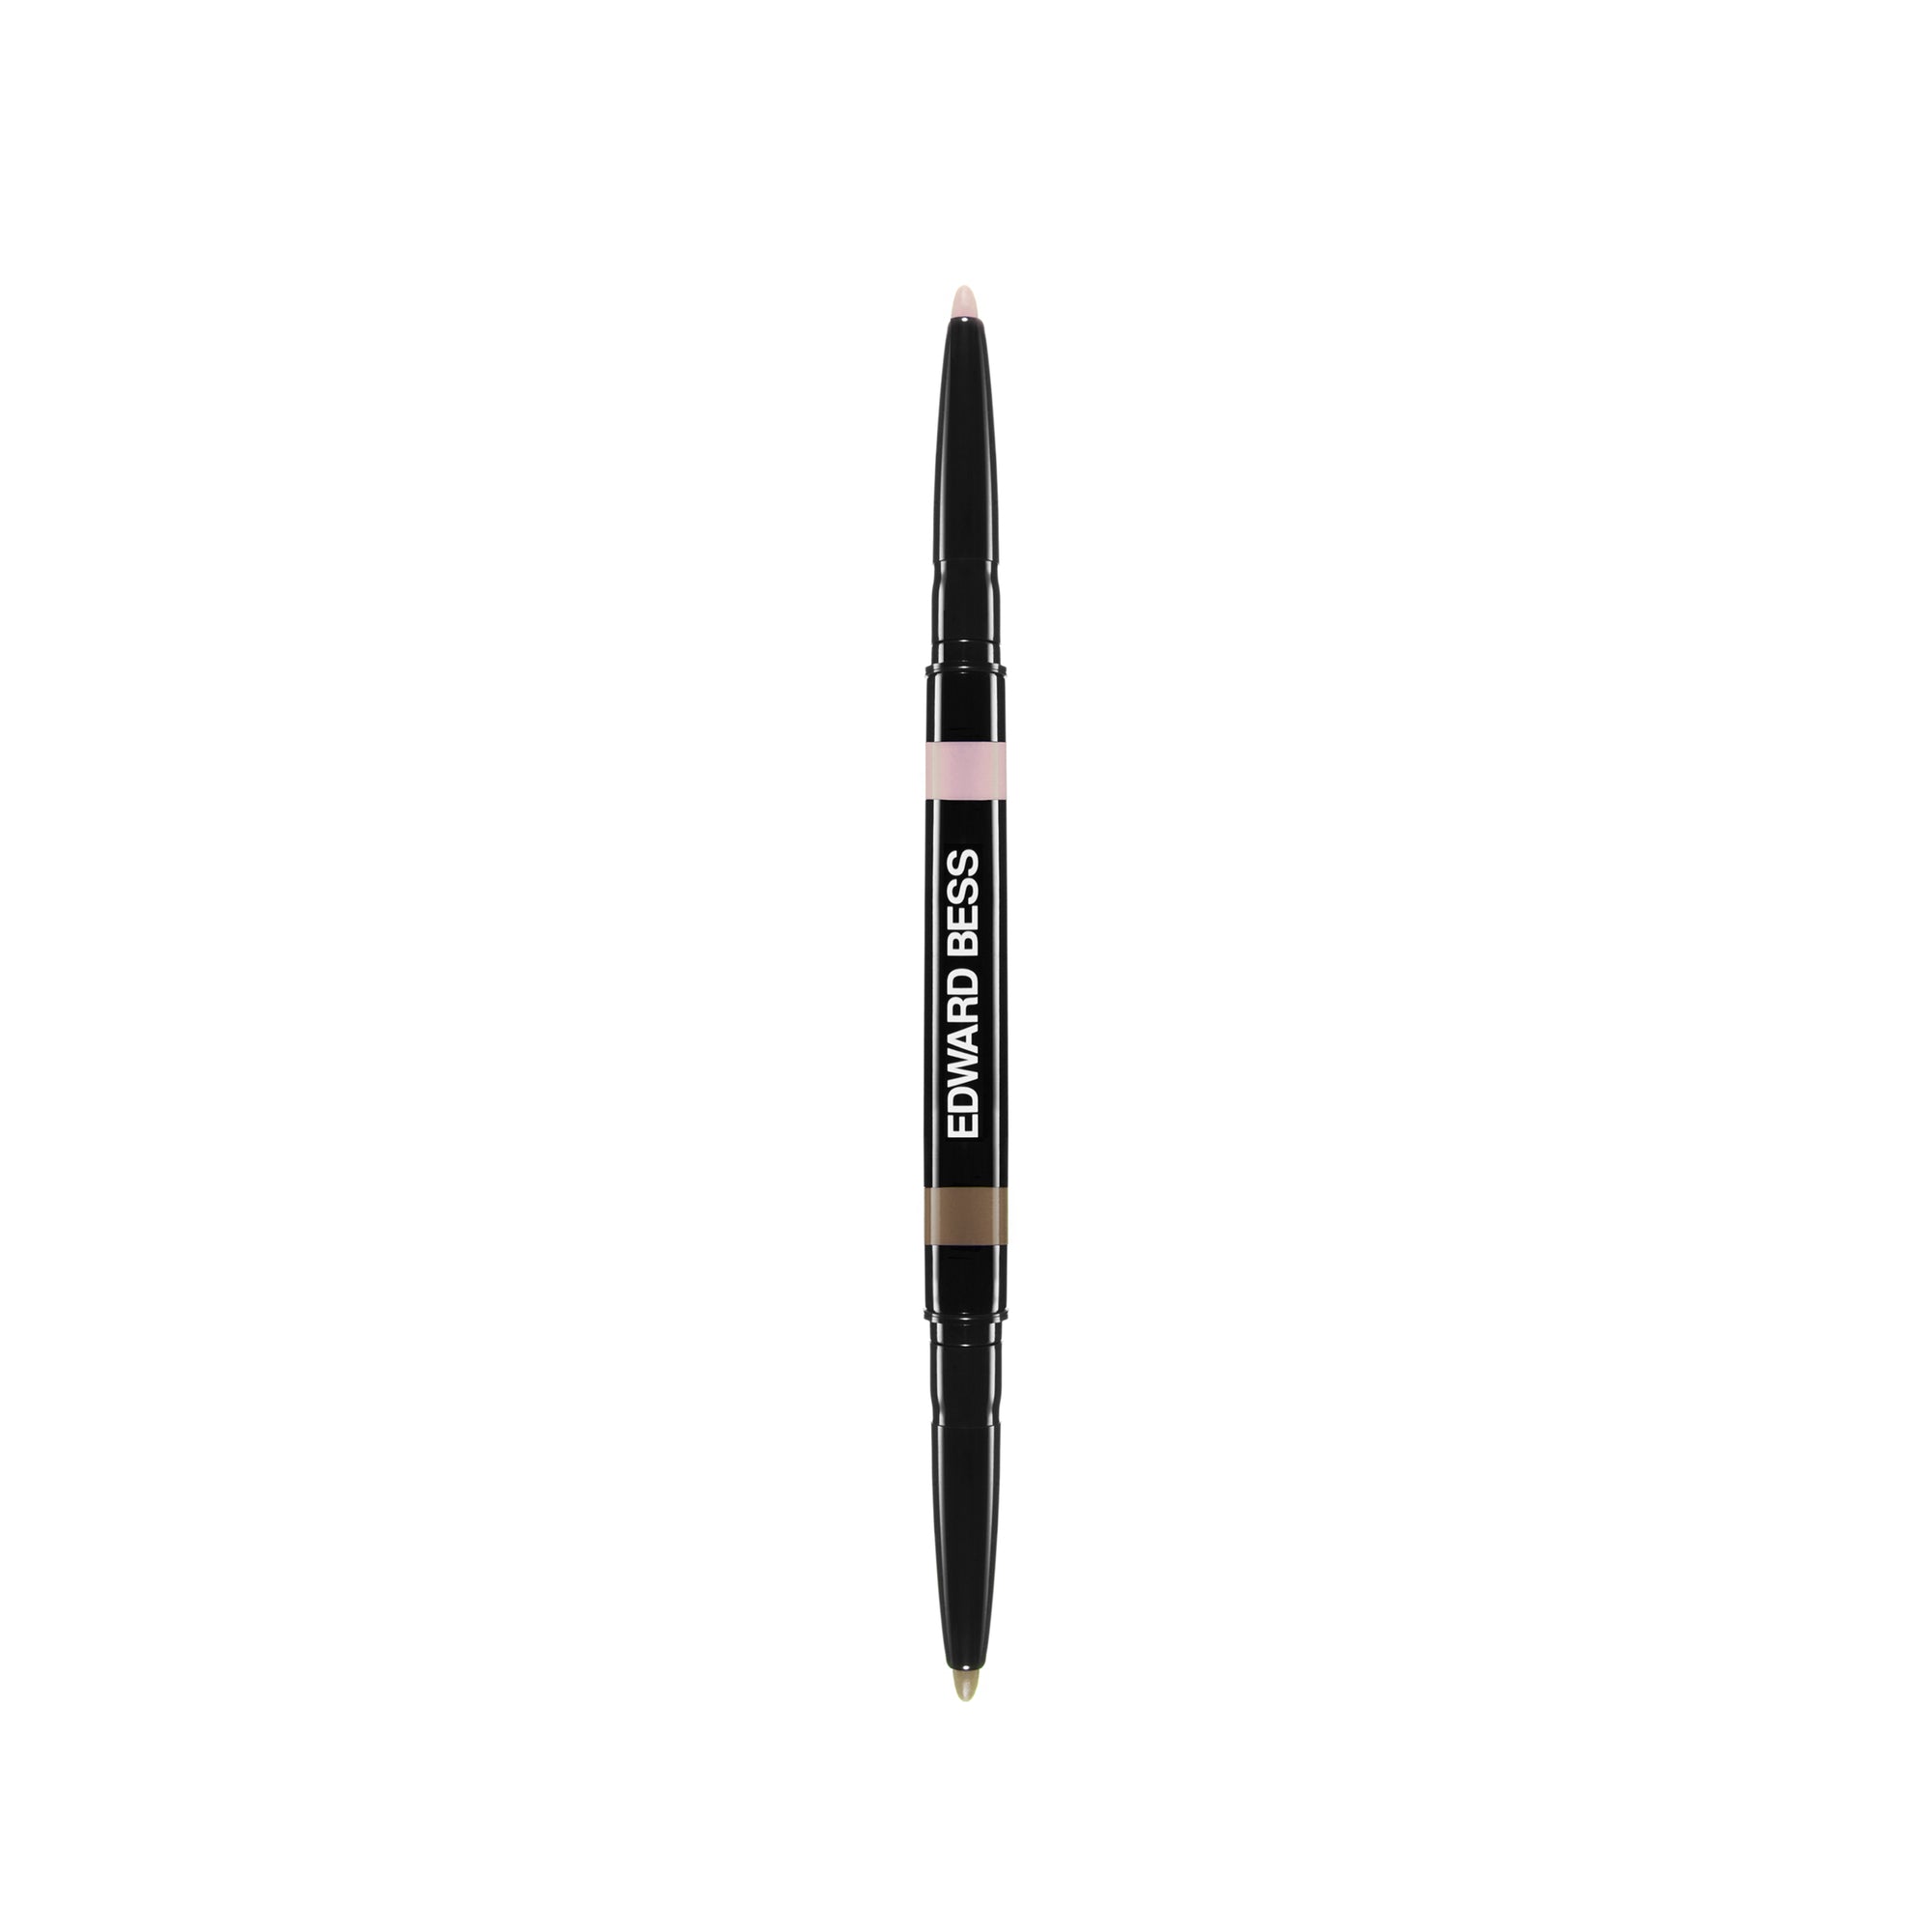 Edward Bess - Fully Defined Eyebrow Duo - (Neutral) view 1